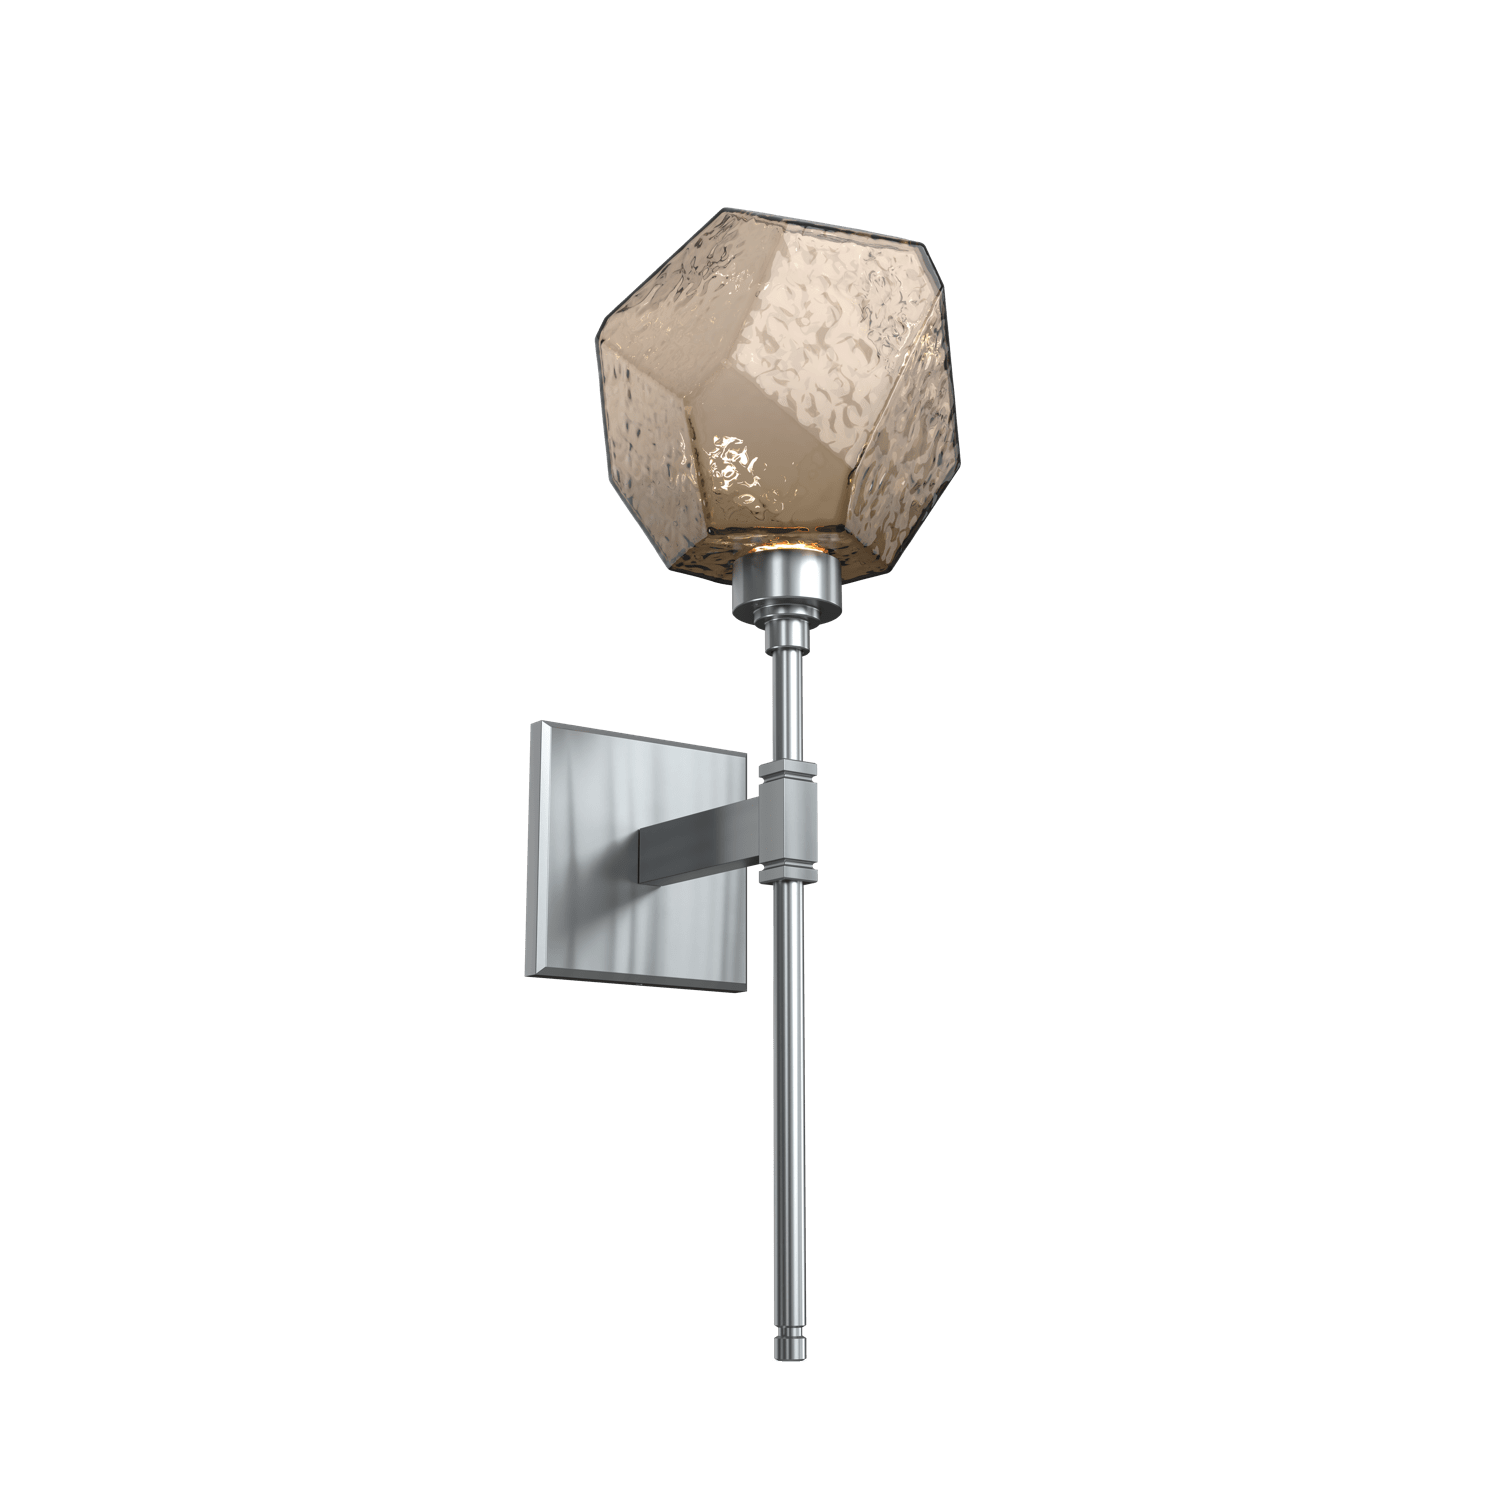 IDB0039-08-SN-B-Hammerton-Studio-Gem-belvedere-wall-sconce-with-satin-nickel-finish-and-bronze-blown-glass-shades-and-LED-lamping